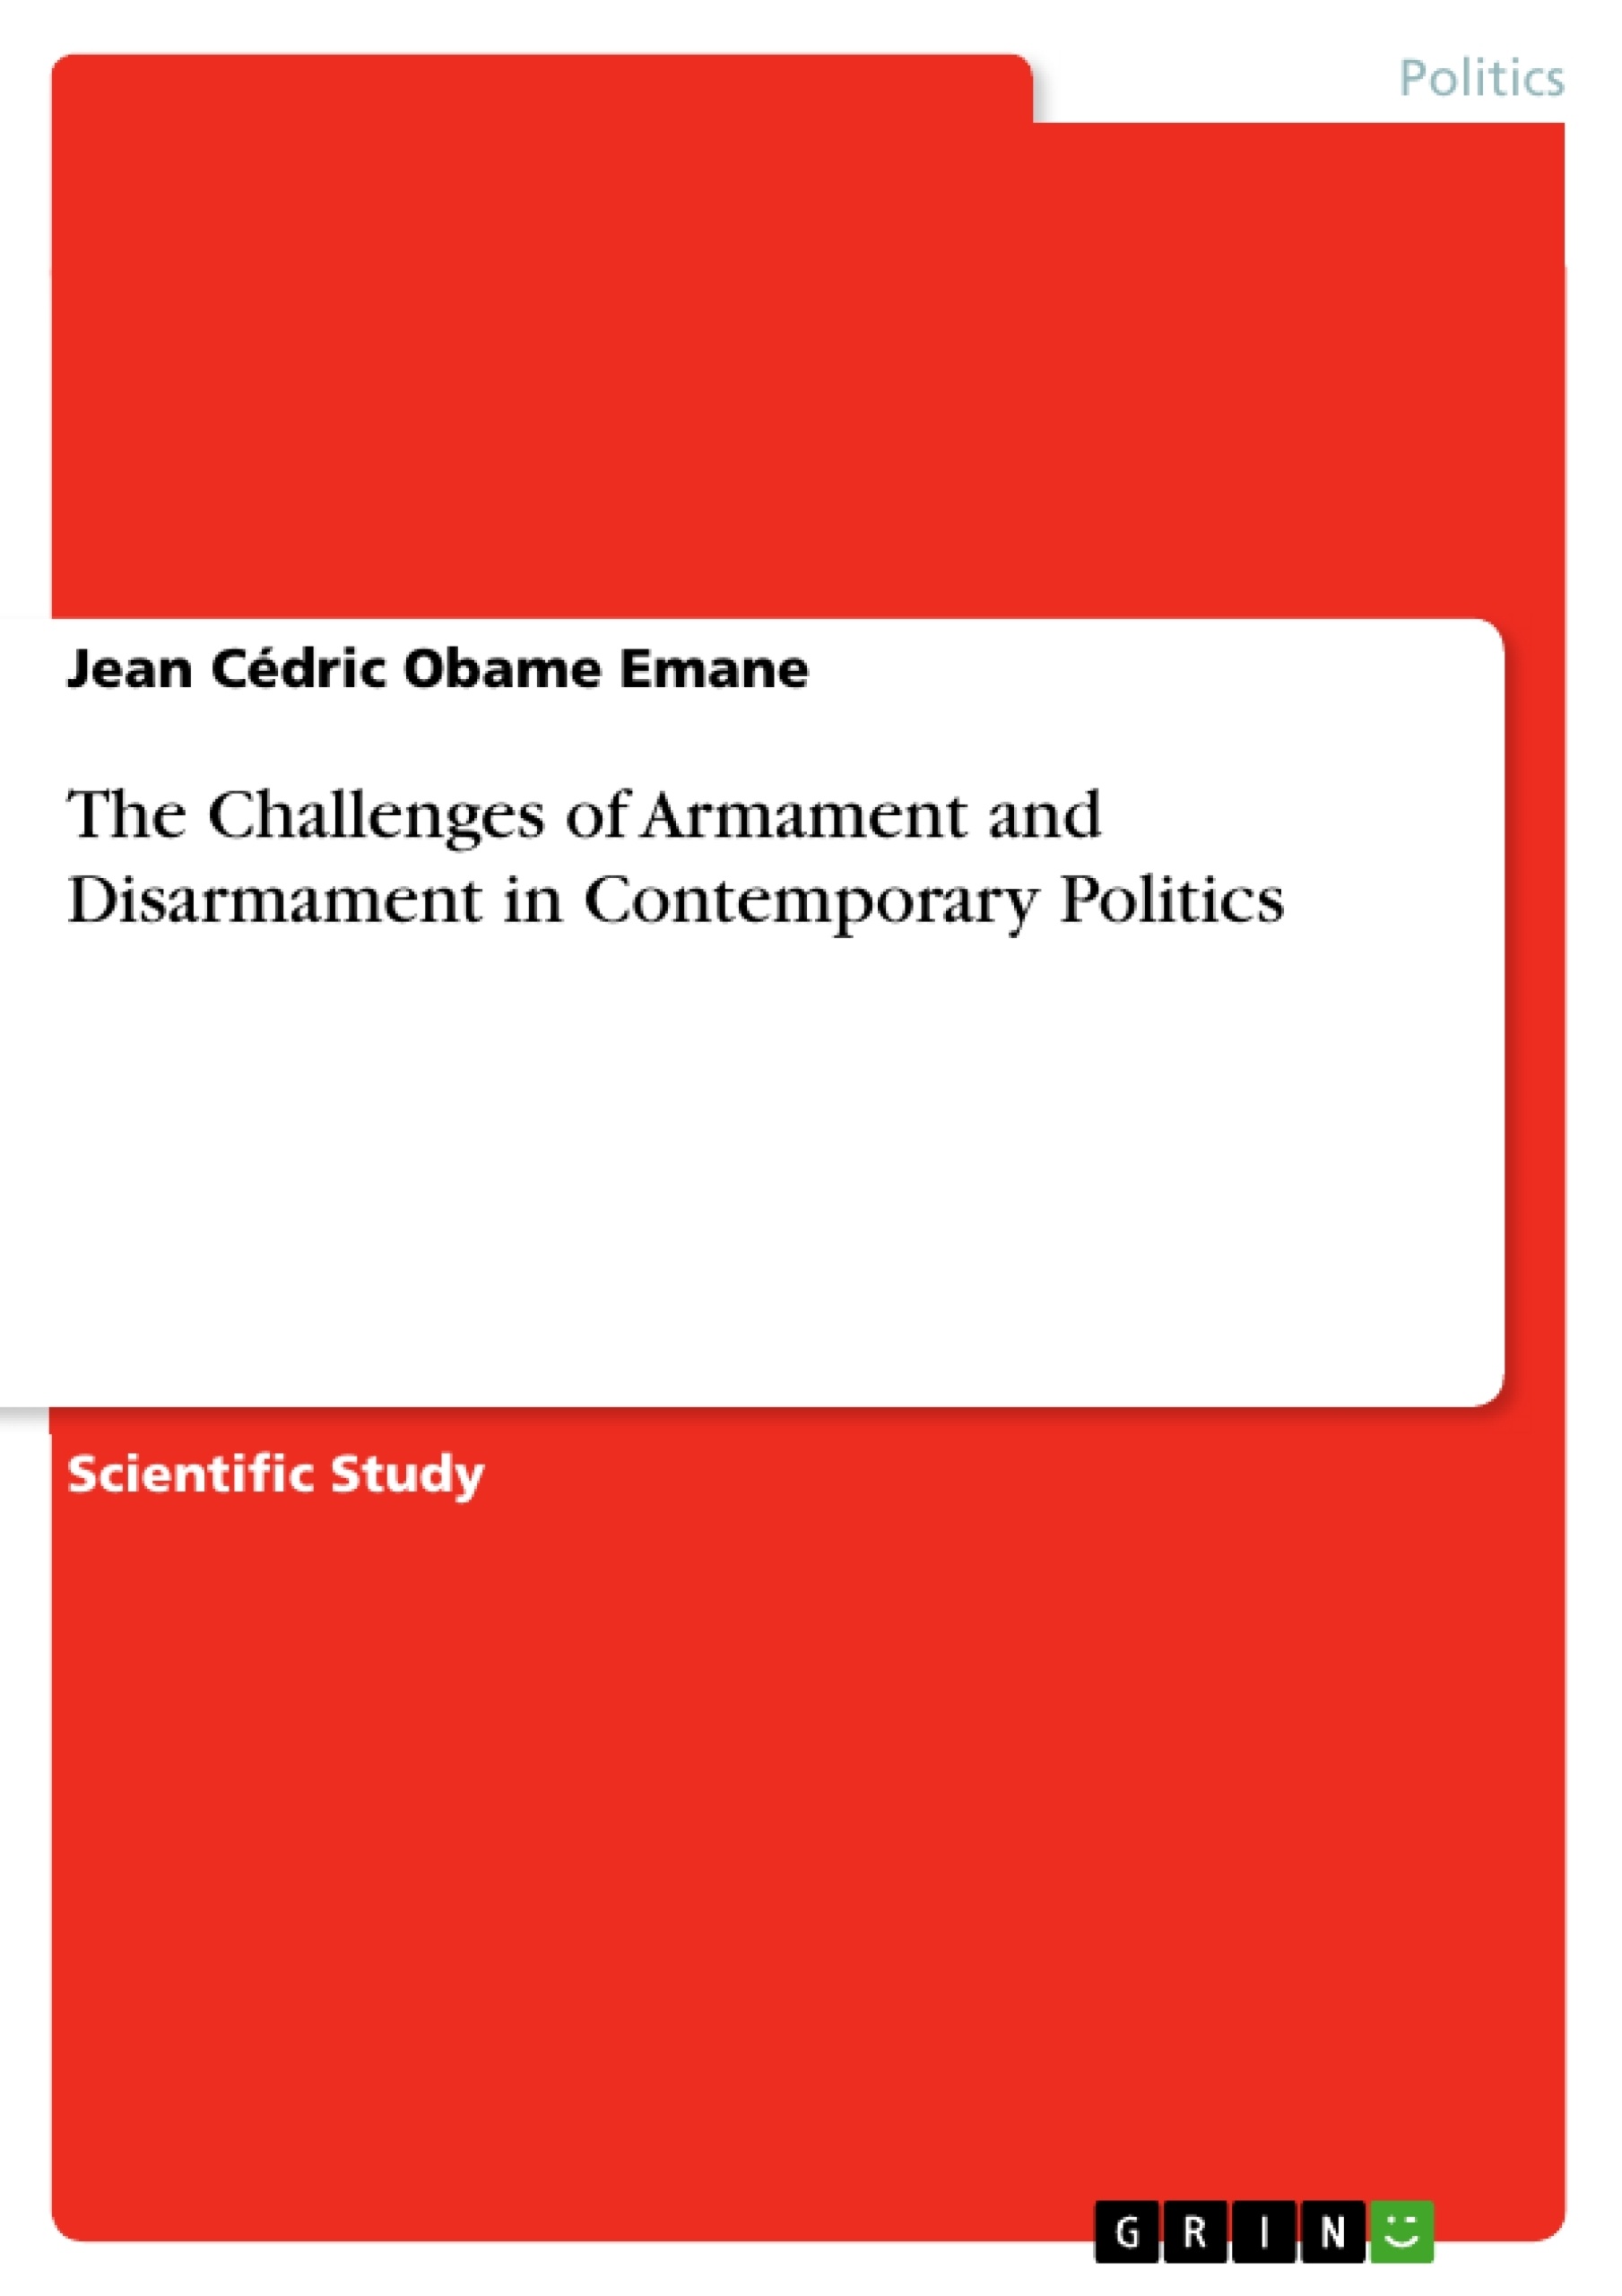 Title: The Challenges of Armament and Disarmament in Contemporary Politics